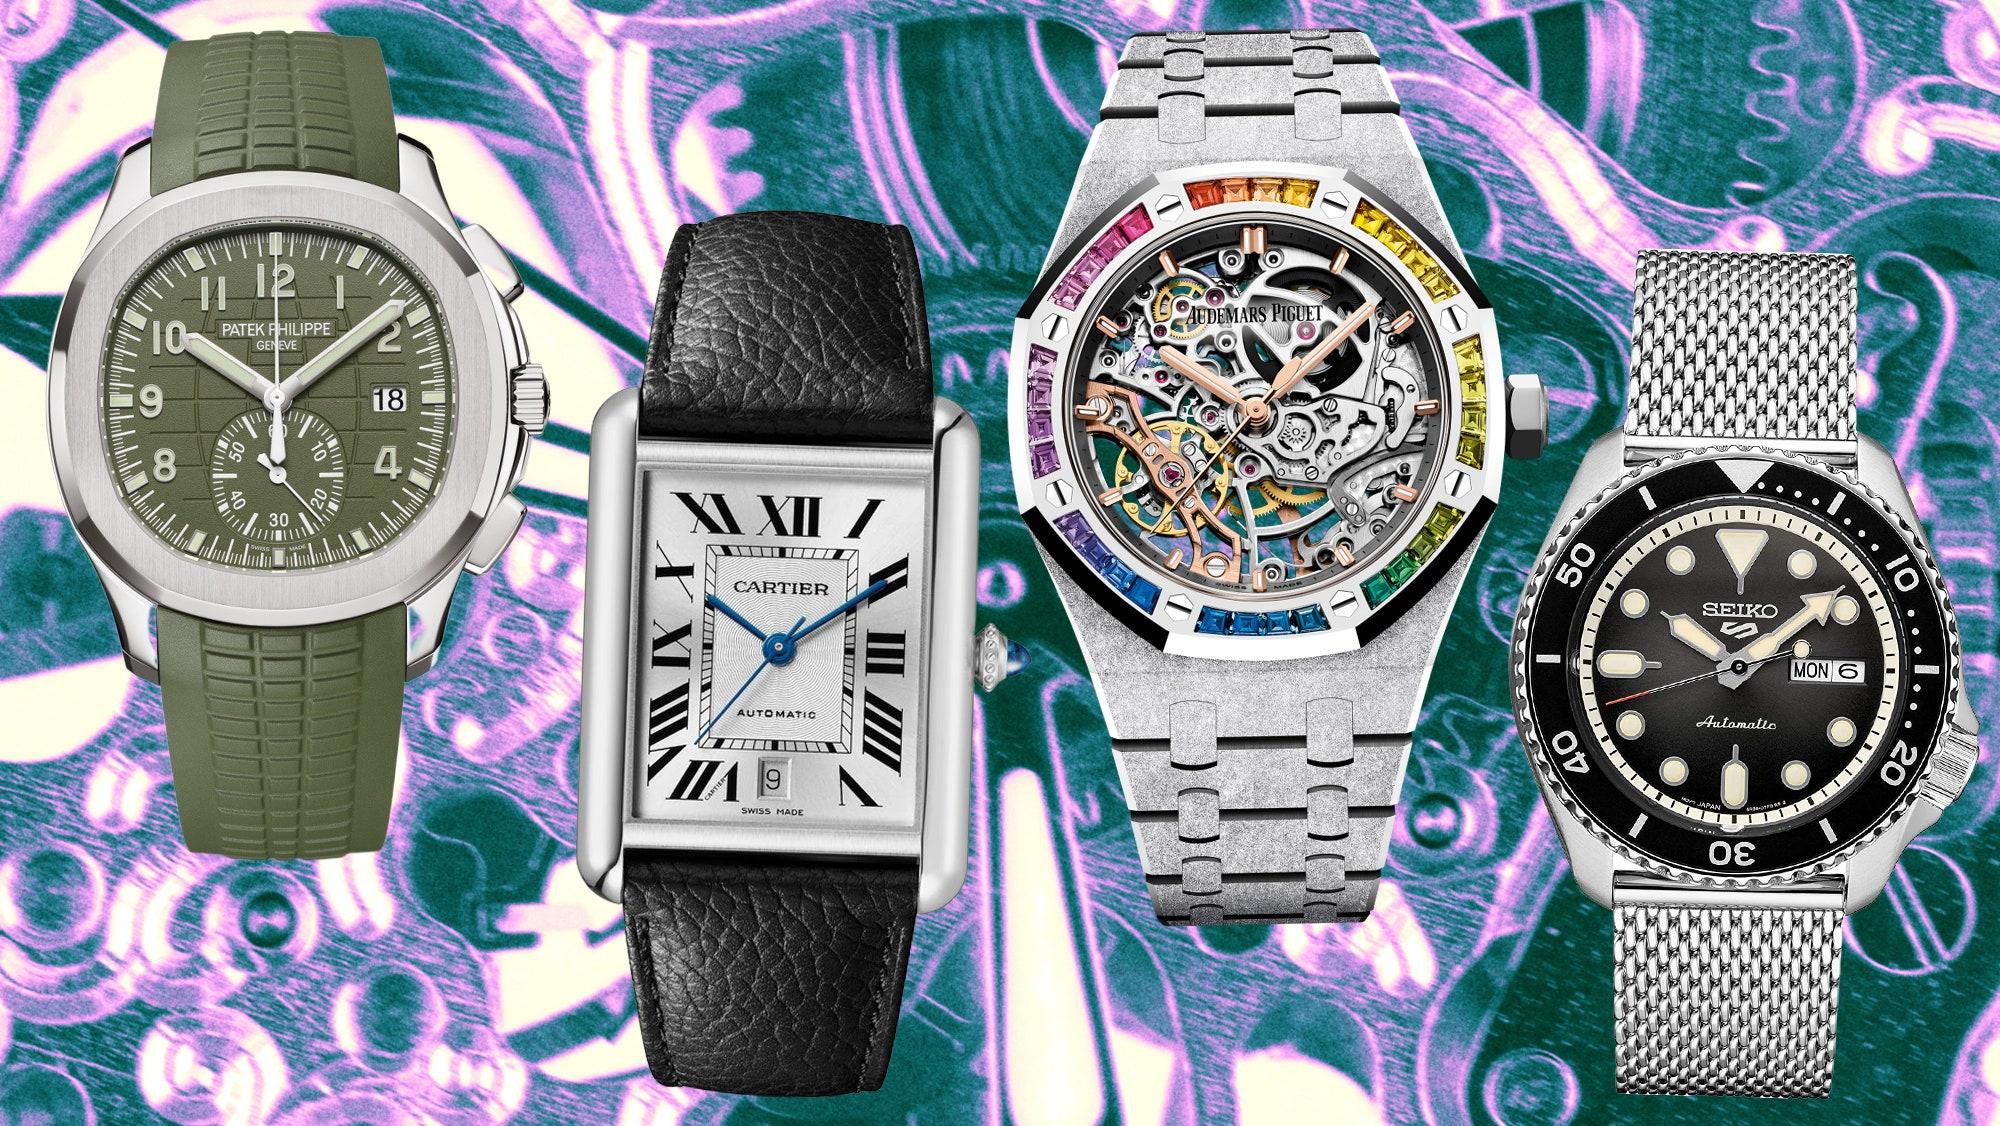 Six of the Best Luxury Watch Brands According to GQ